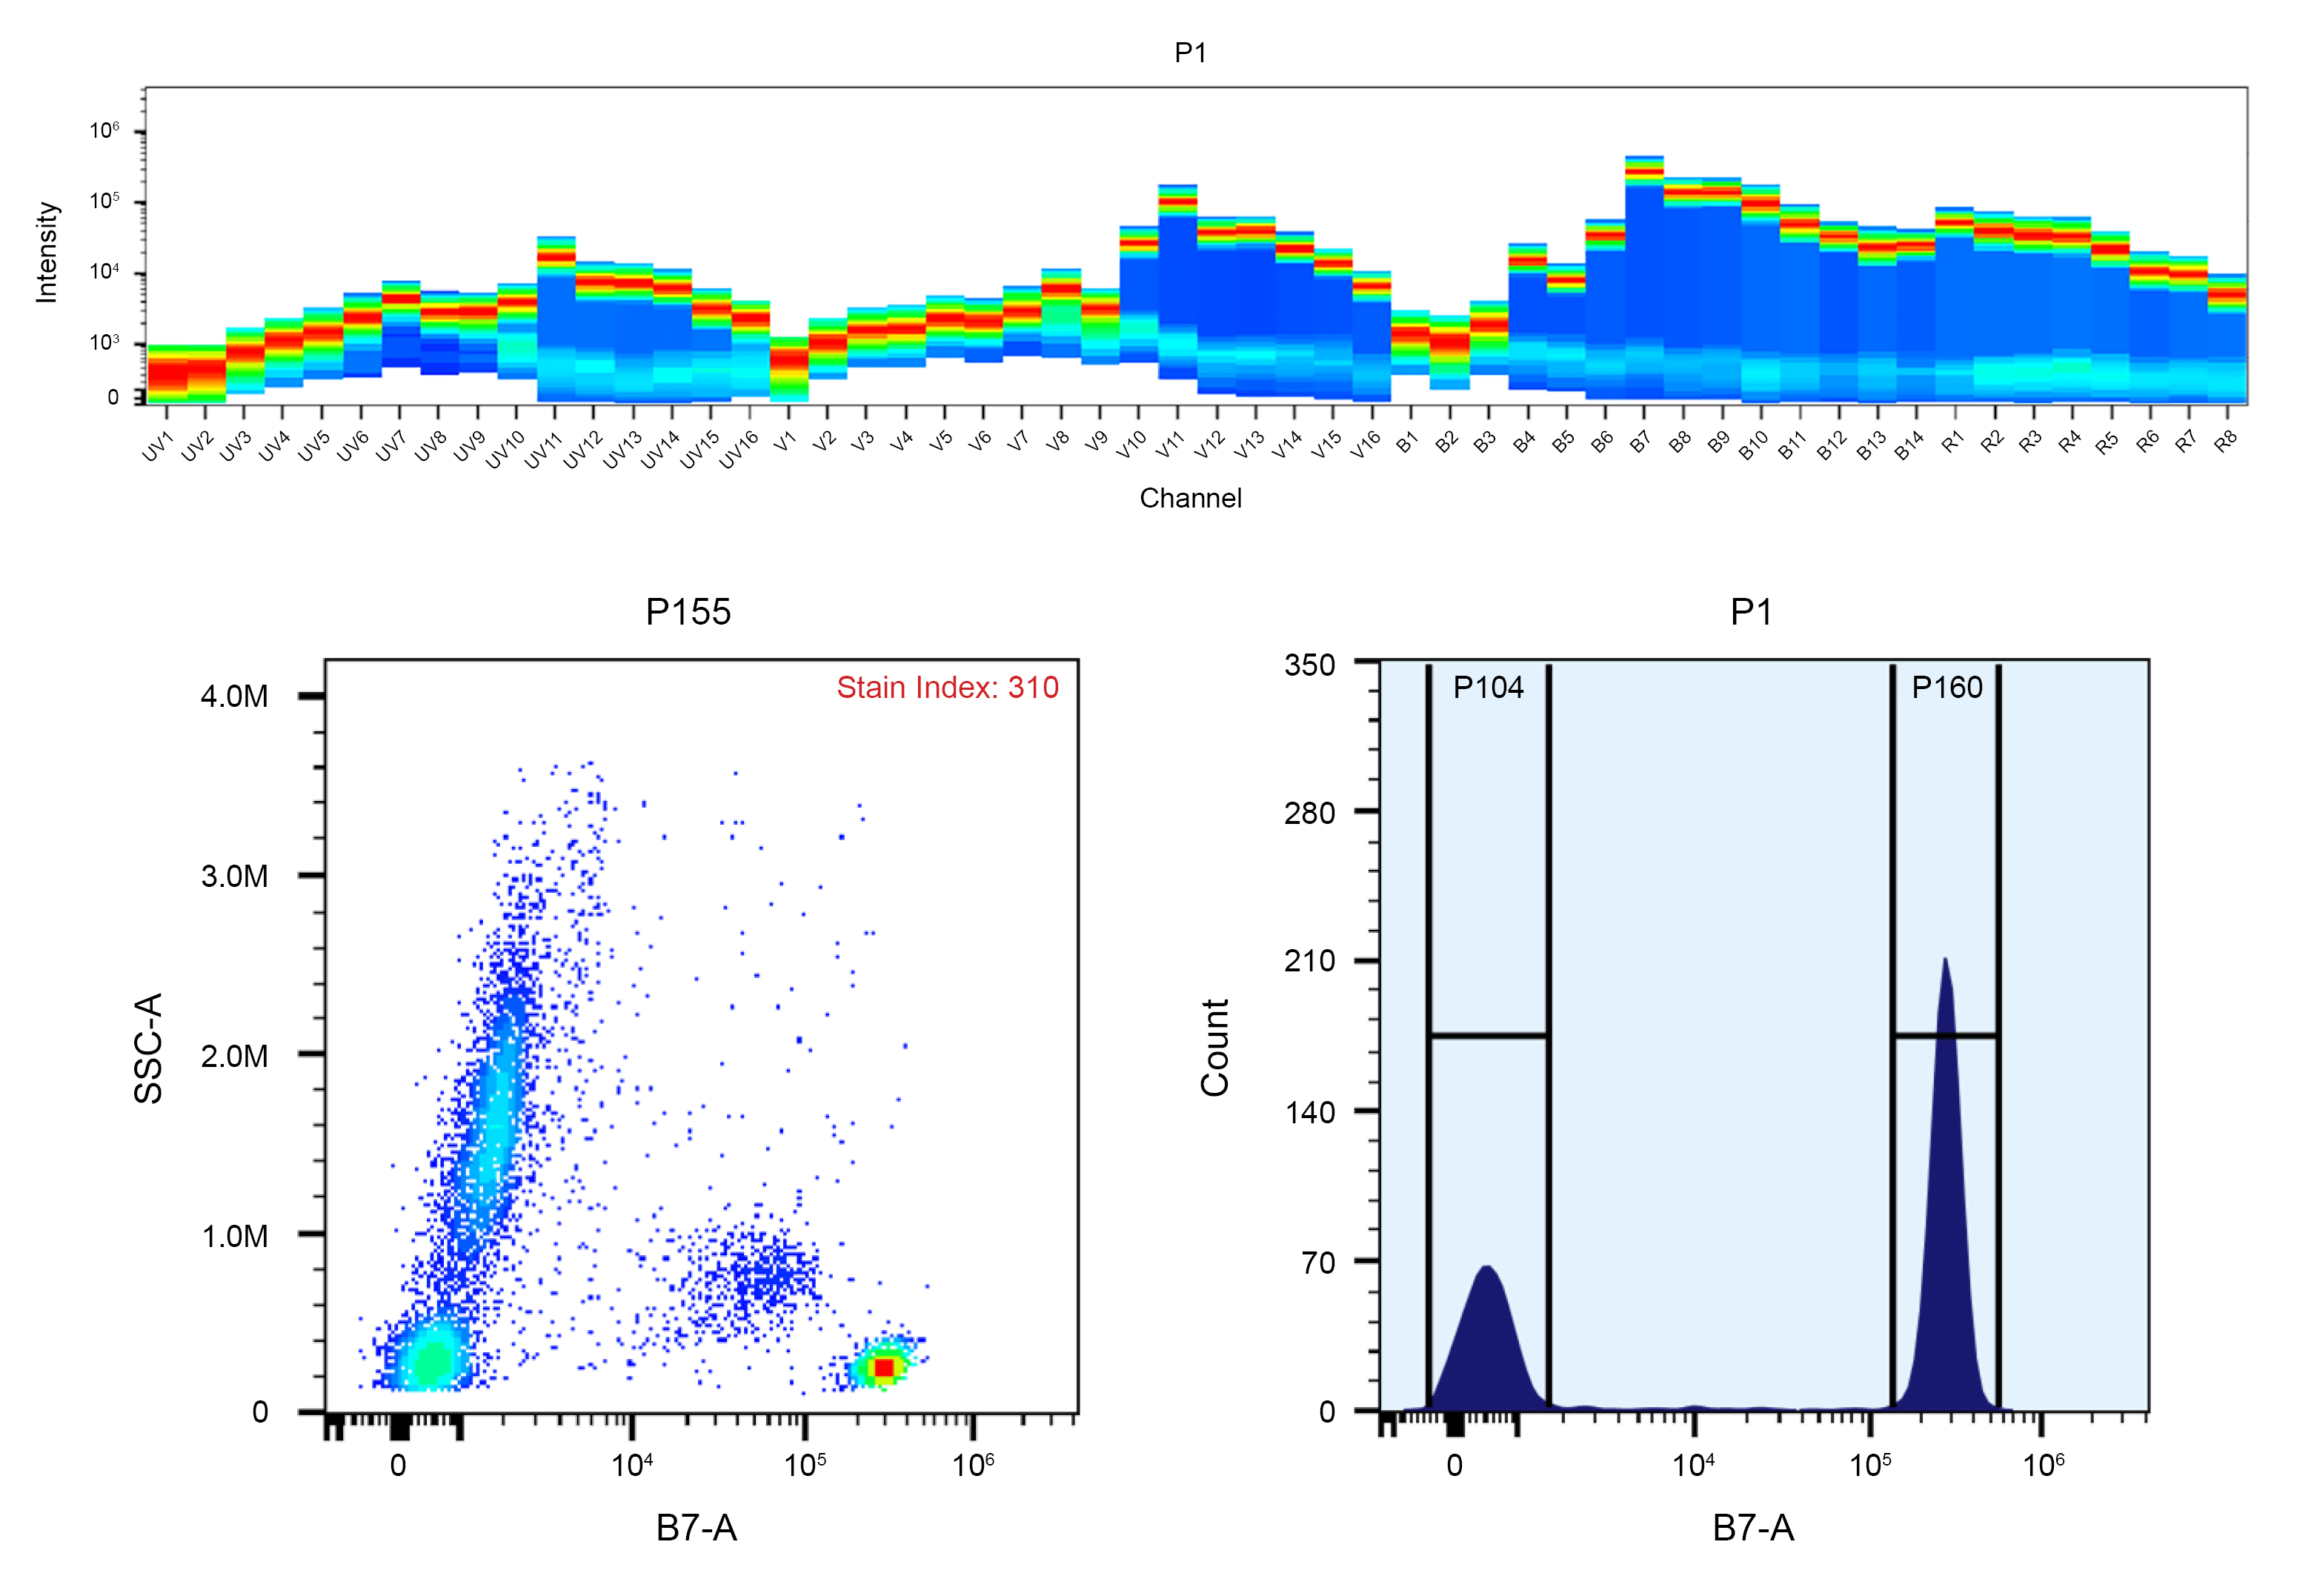 Top) Spectral pattern was generated using a 4-laser spectral cytometer. Spatially offset lasers (355 nm, 405 nm, 488 nm, and 640 nm) were used to create four distinct emission profiles, then, when combined, yielded the overall spectral signature. Bottom) Flow cytometry analysis of whole blood stained with PE/iFlour® 625 anti-human CD4 *SK3* conjugate. The fluorescence signal was monitored using an Aurora spectral flow cytometer in the B7-A channel.
